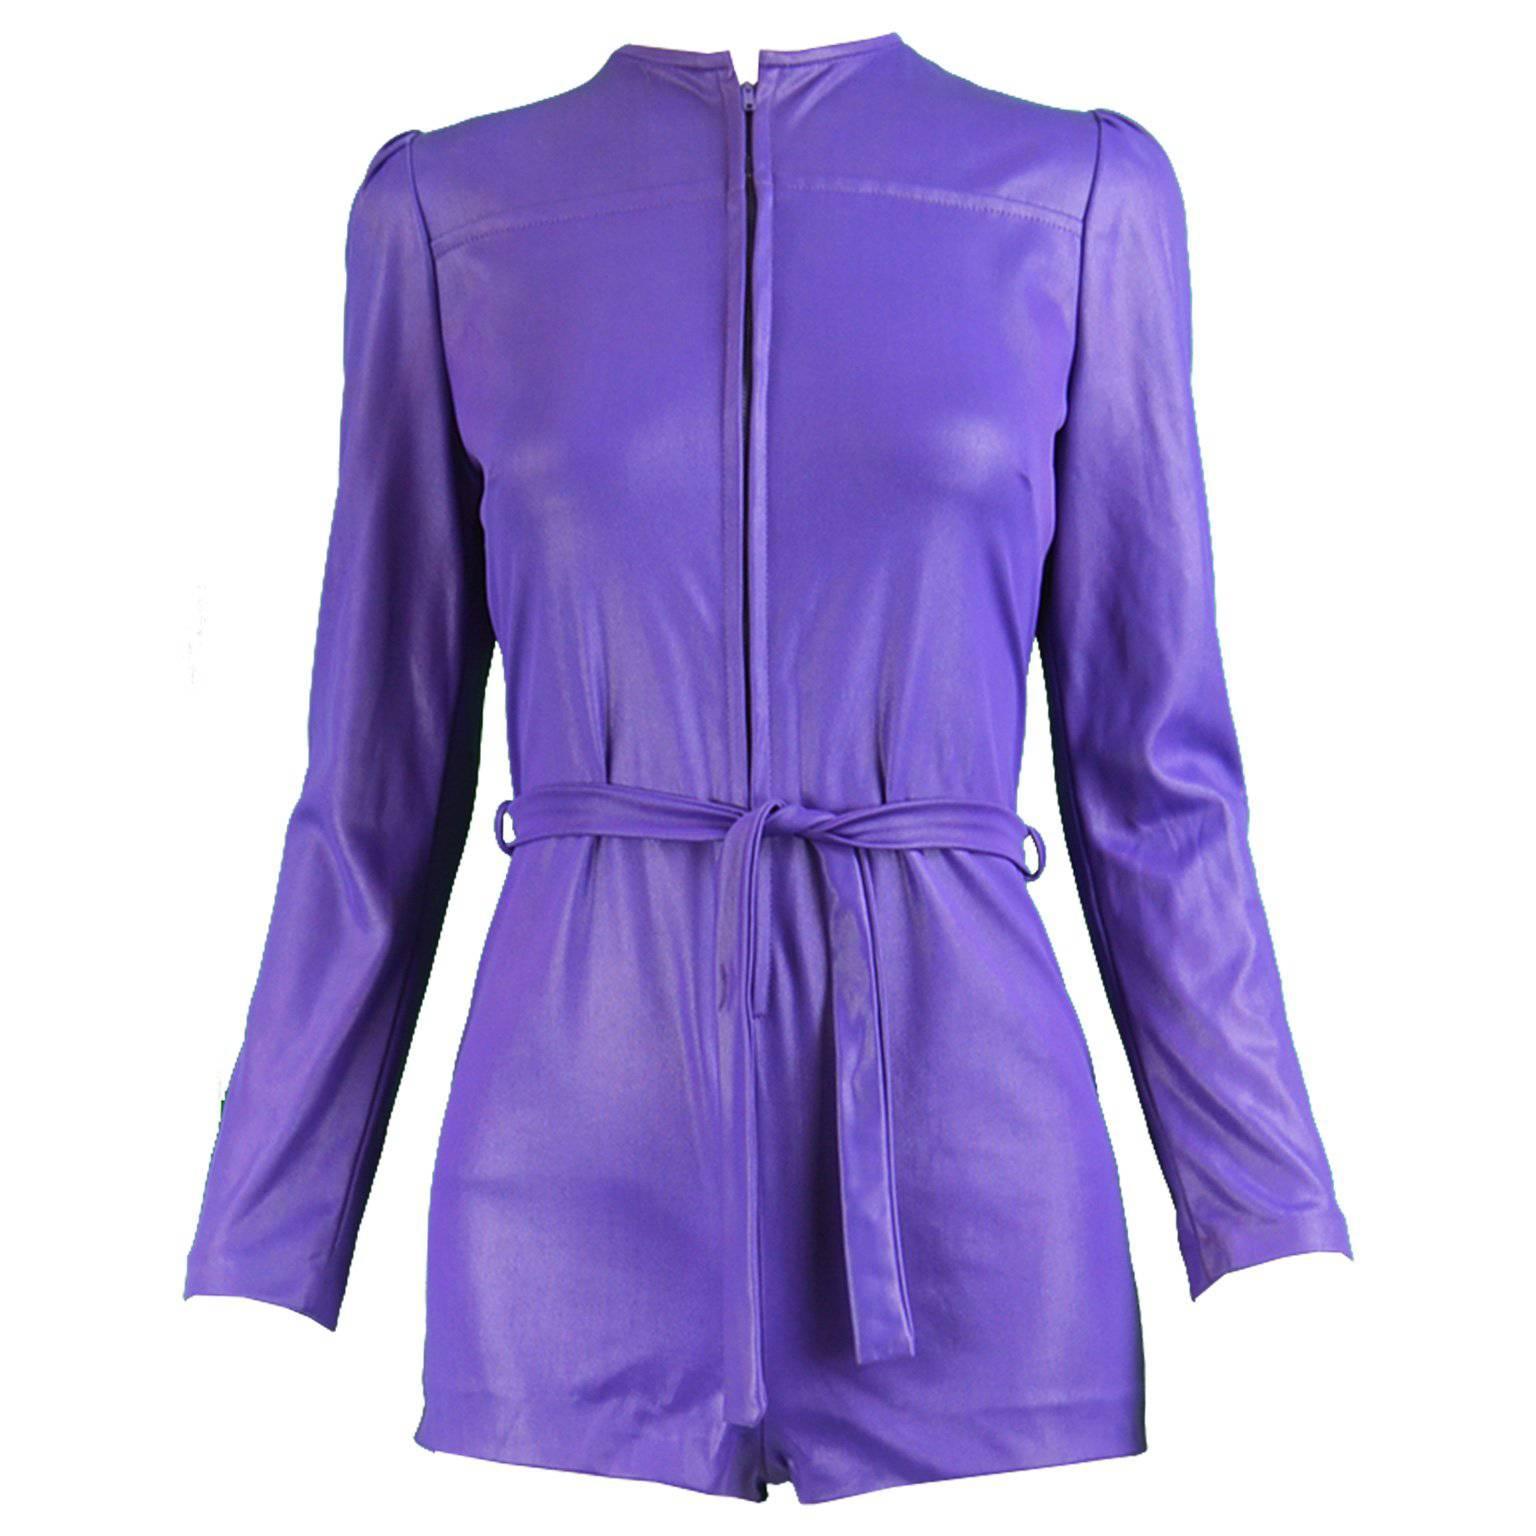 London Mob of Carnaby Street Purple Wet Look Playsuit, 1960s For Sale